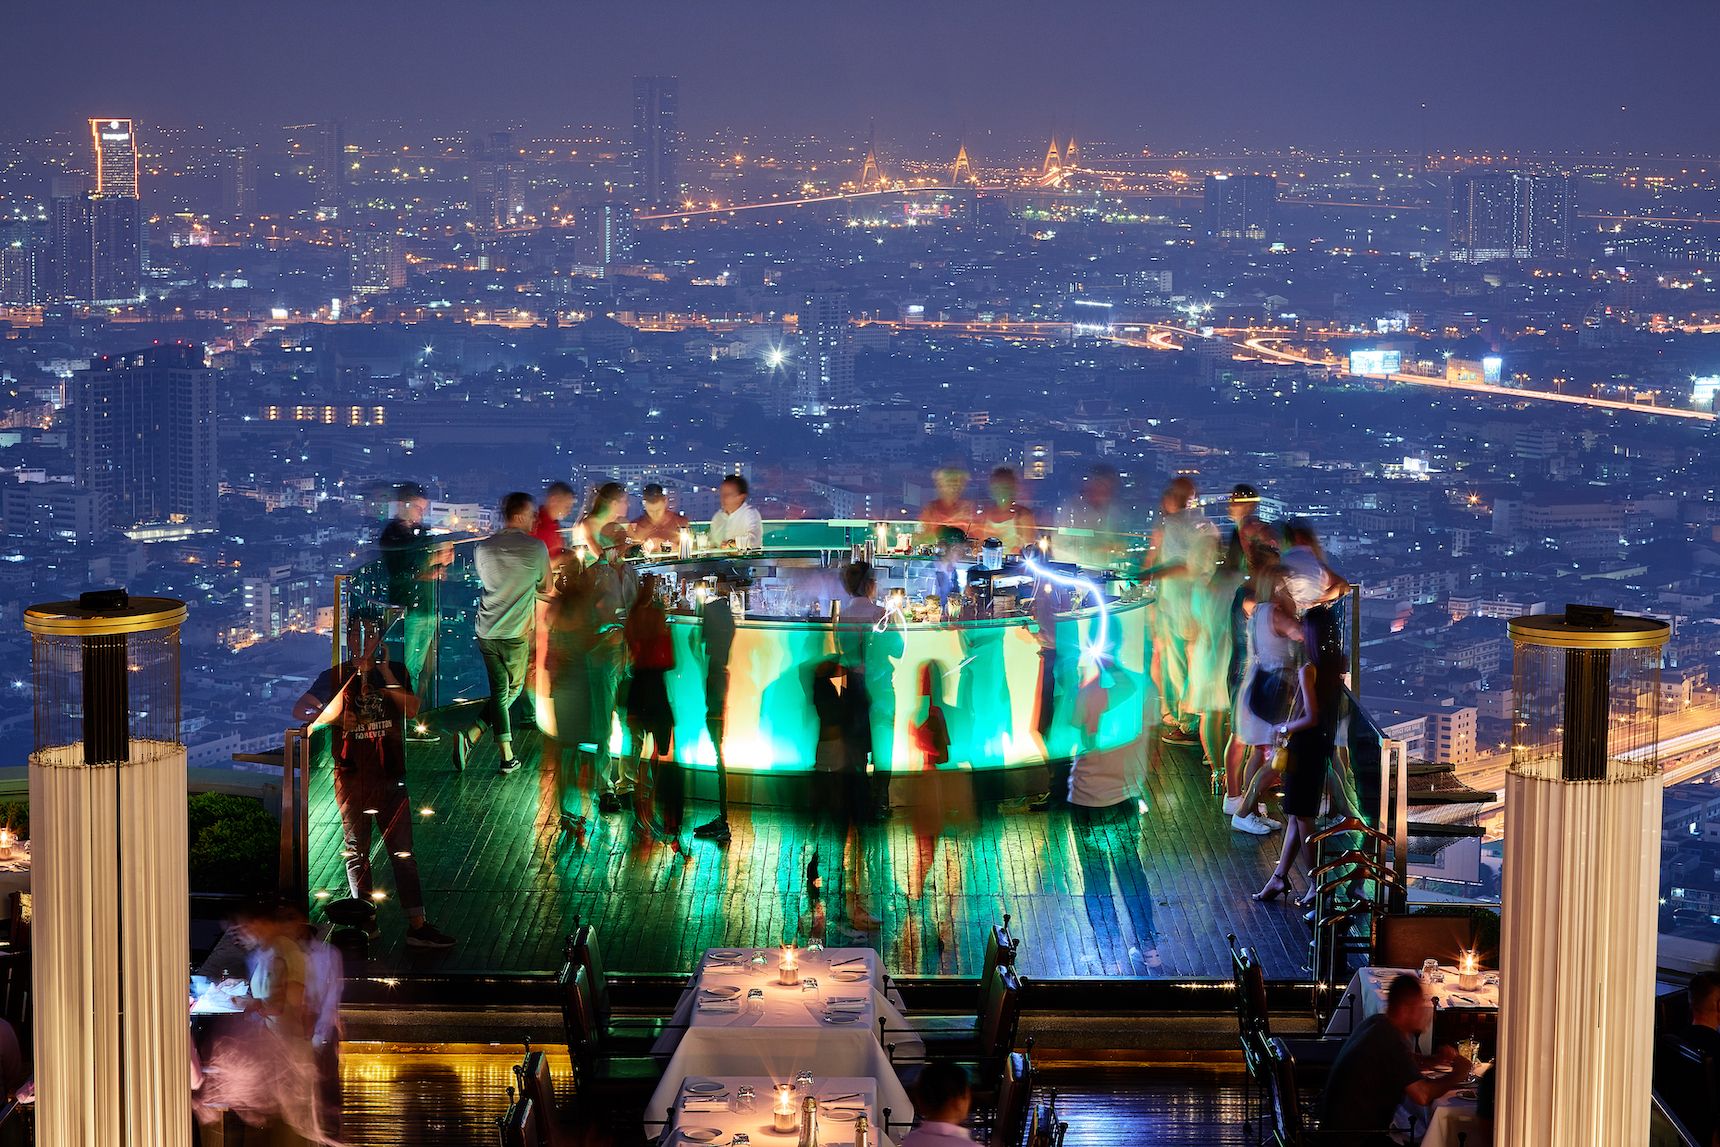 SkyBar in Bangkok is a popular spot for couples to hangout